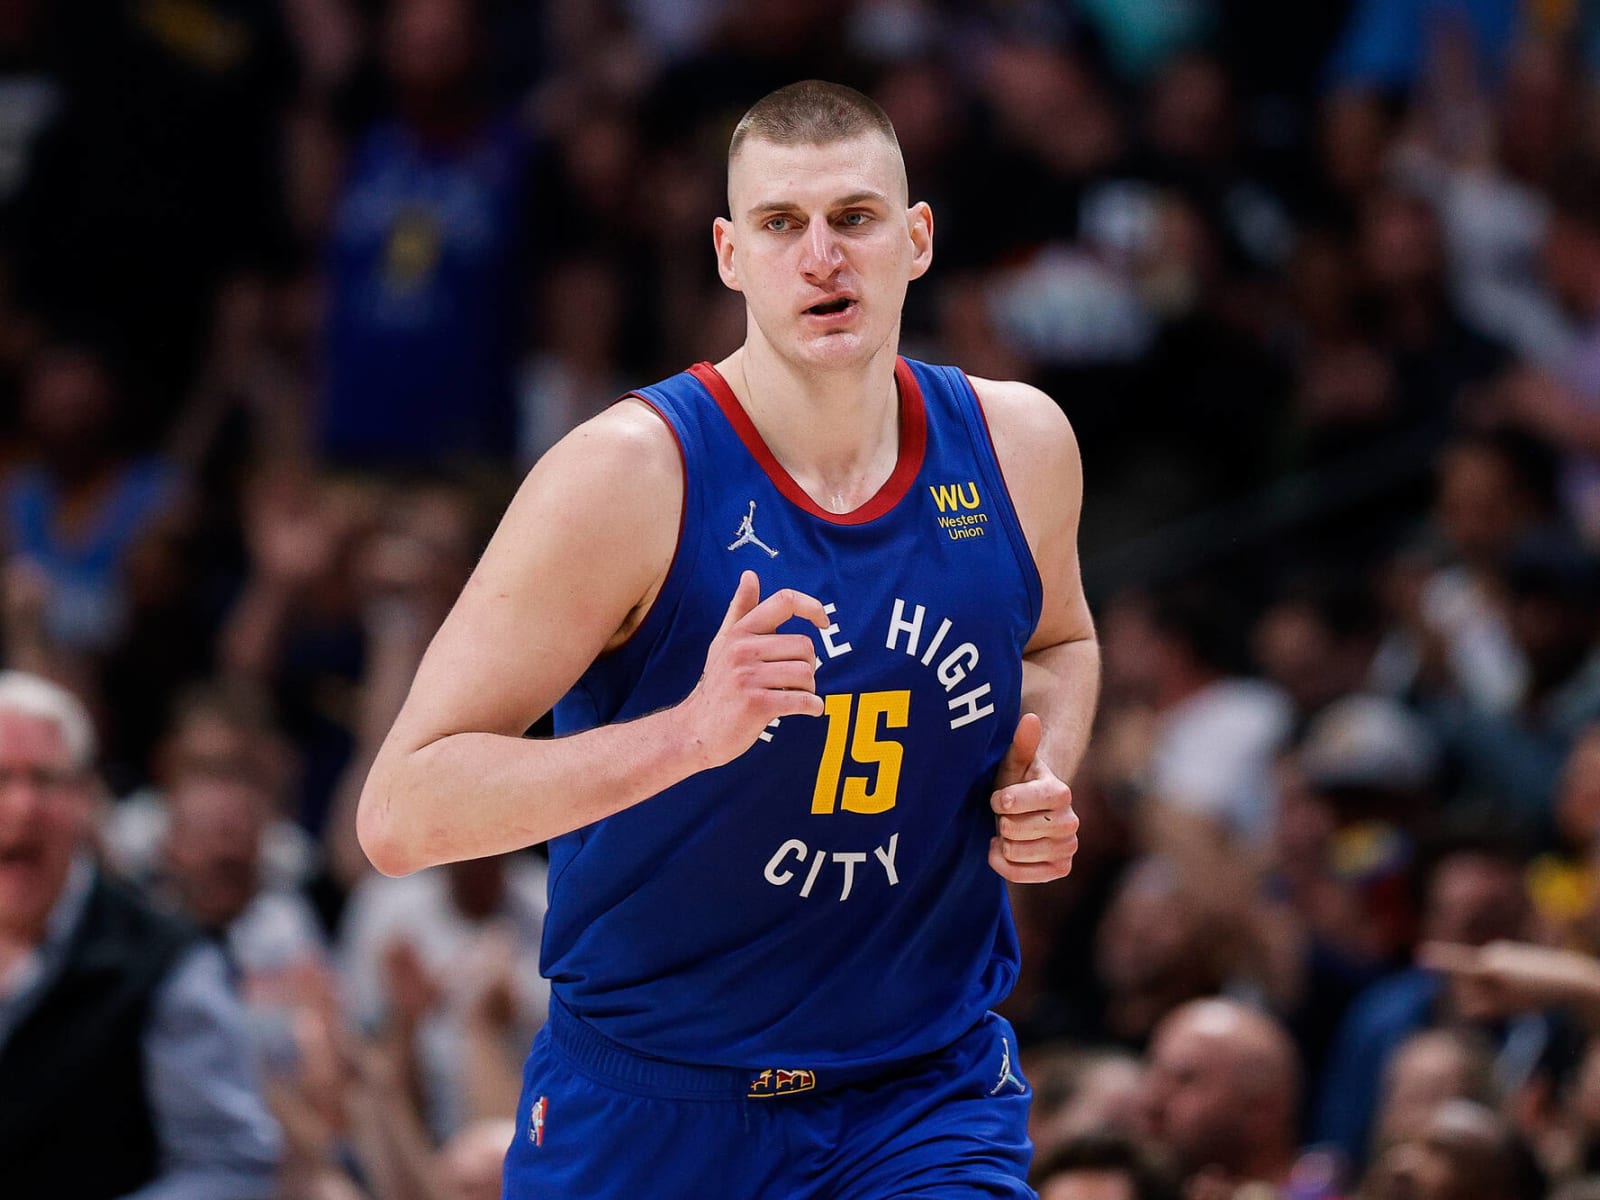 The Denver Nuggets' Current Players' Status For The 2022-23 Season